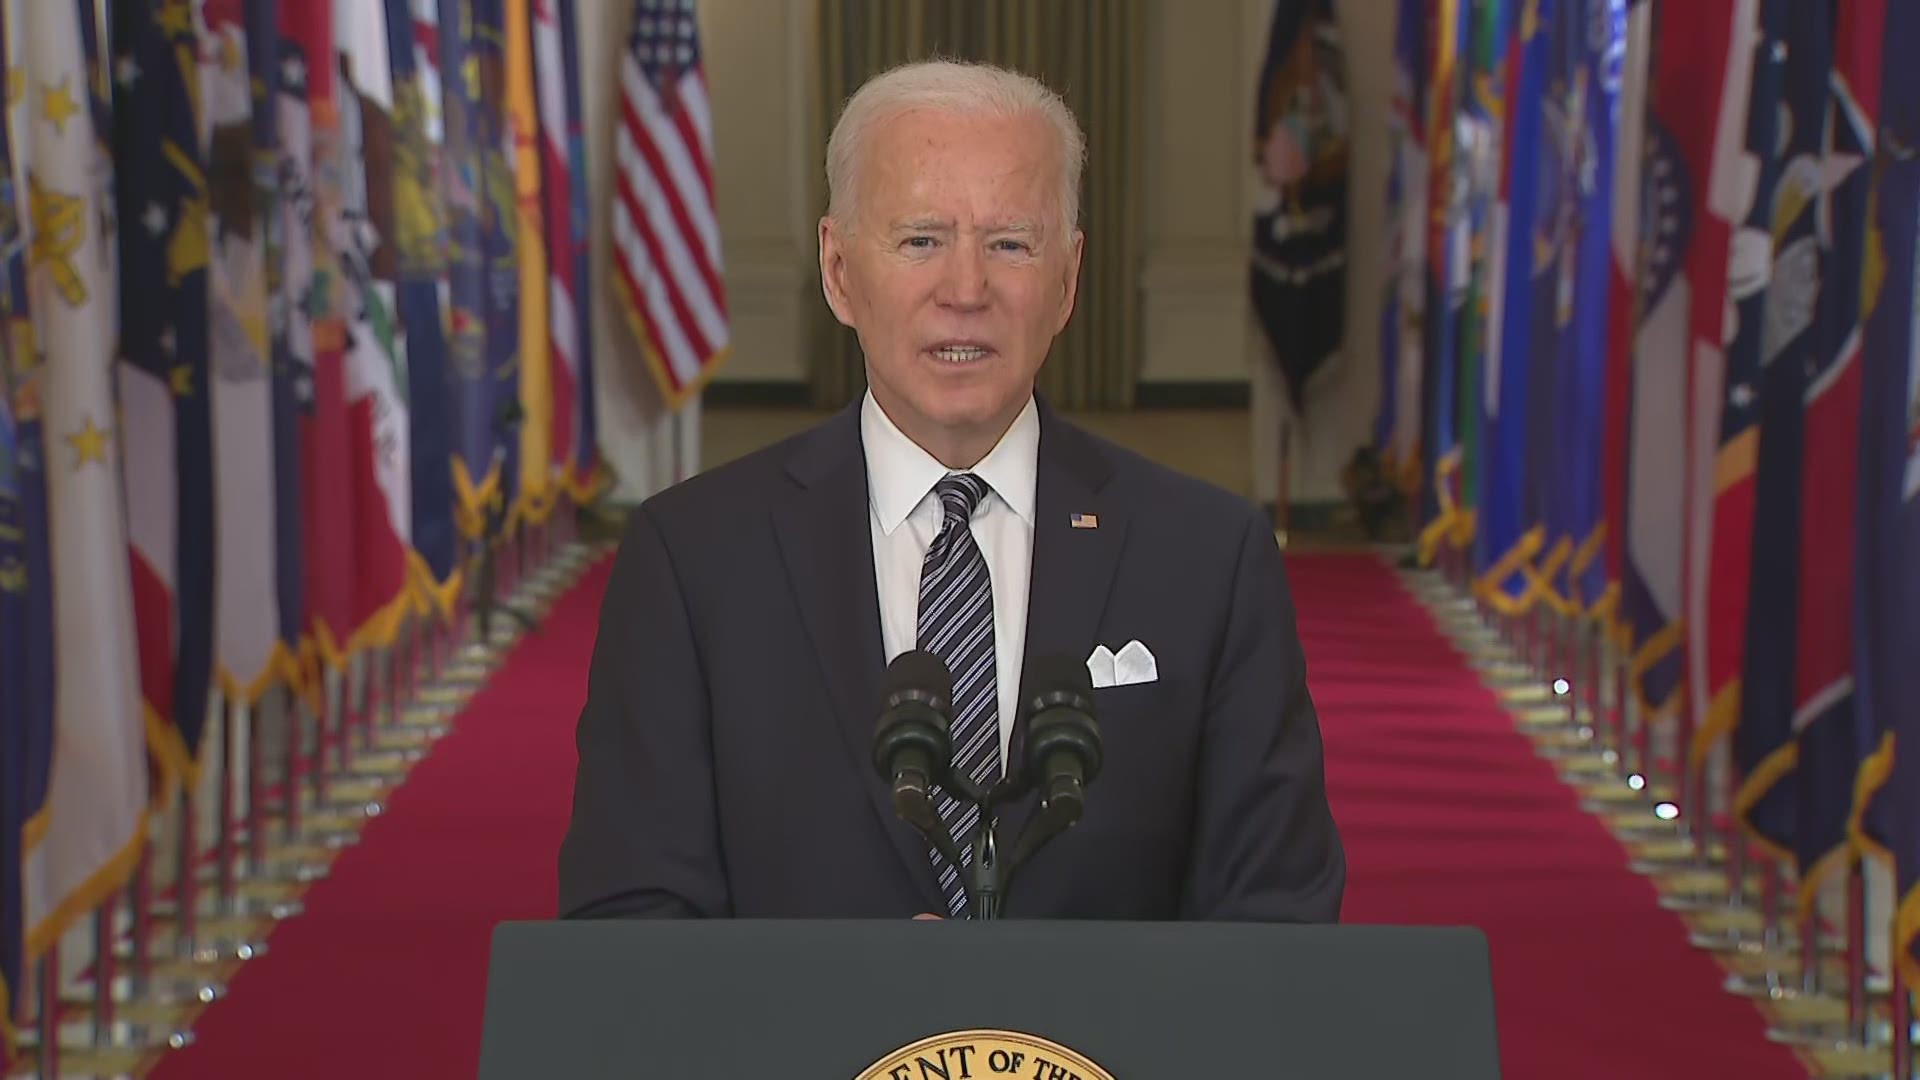 President Joe Biden on Thursday night highlighted the progress there's been in COVID-19 vaccine manufacturing and administration.